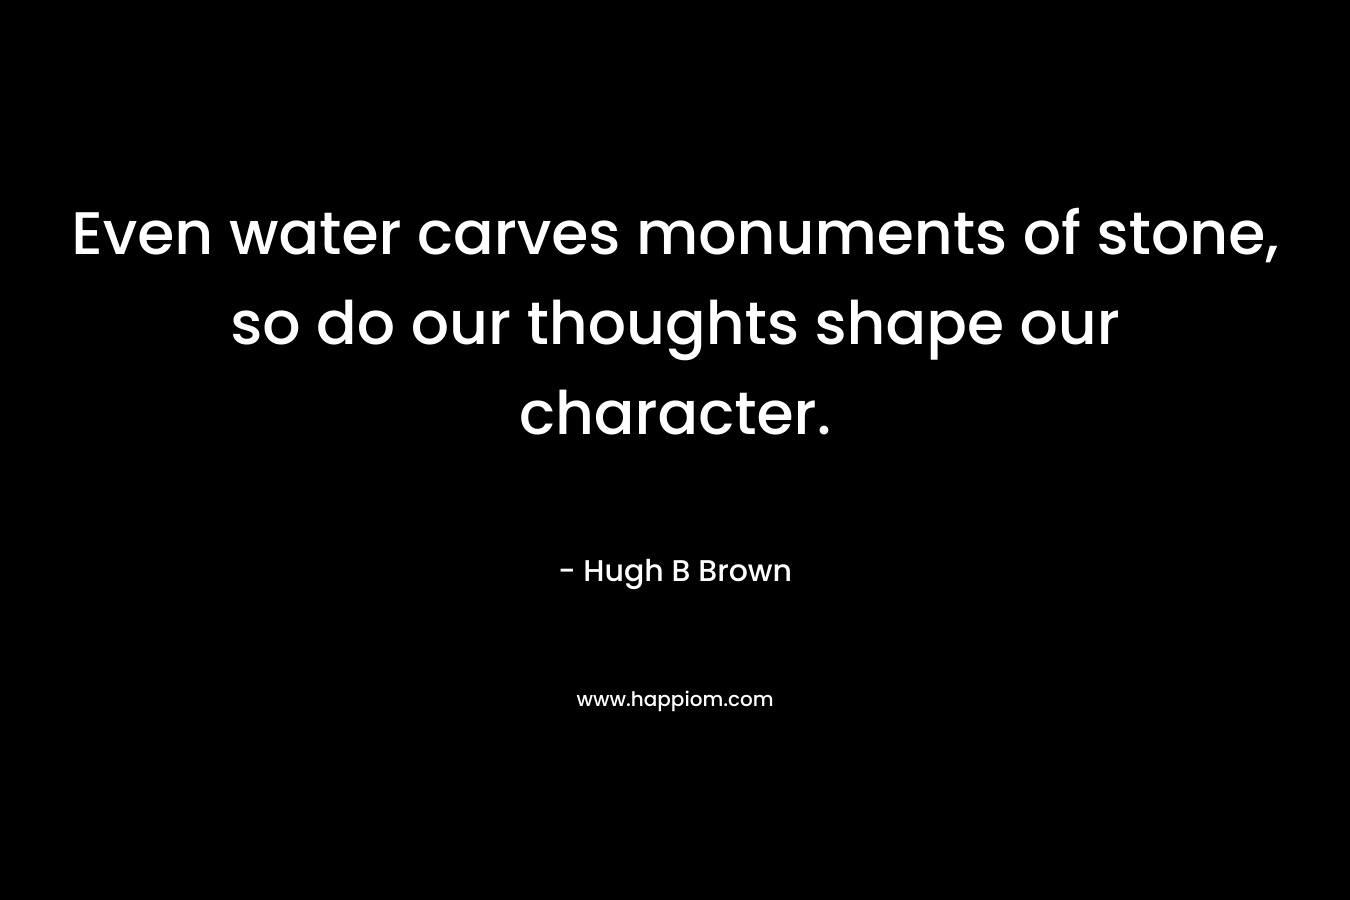 Even water carves monuments of stone, so do our thoughts shape our character. – Hugh B Brown